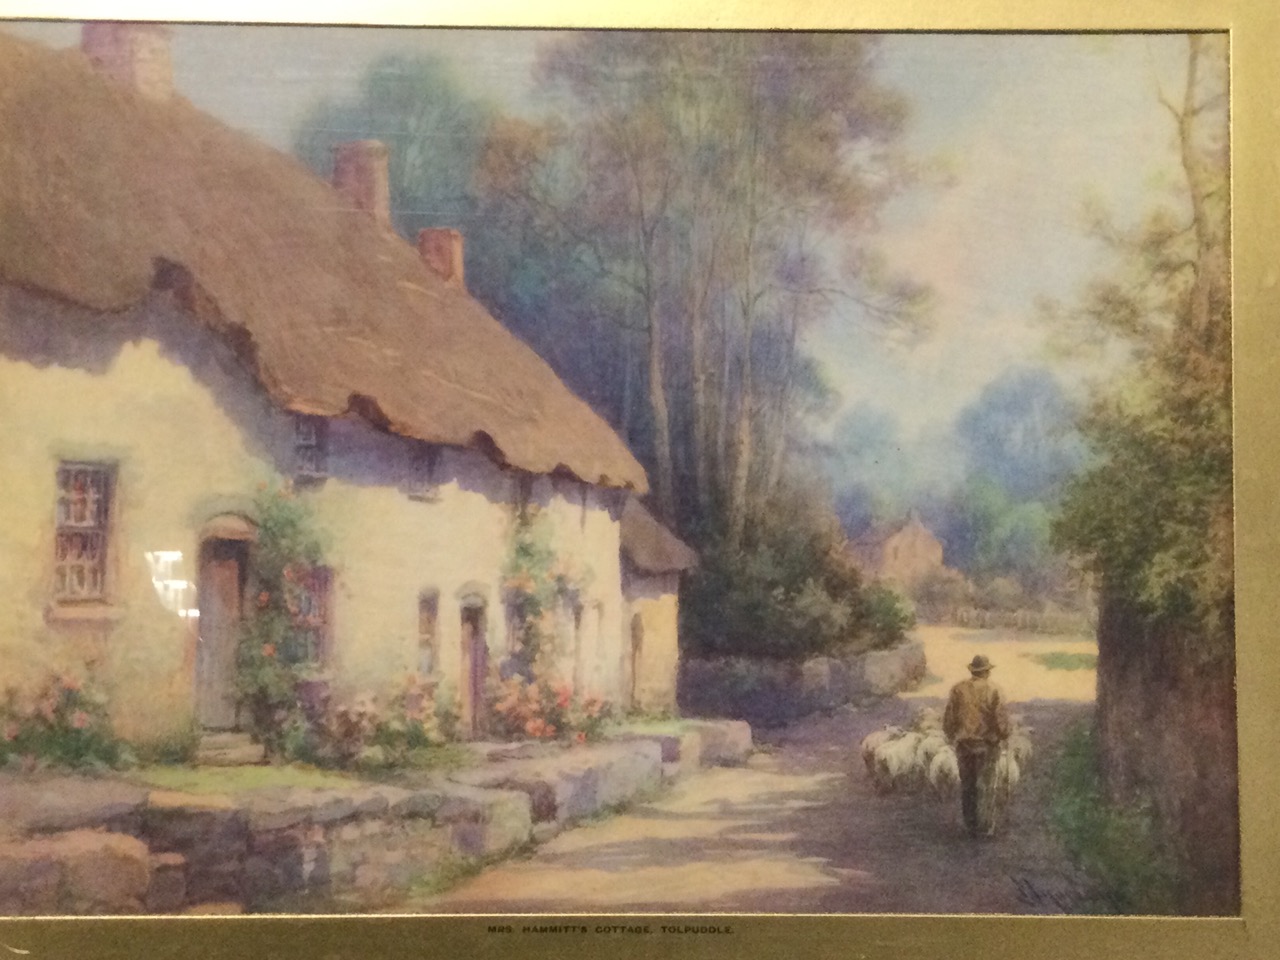 Myastinge?, a pair of late Victorian coloured rural prints of Tolpuddle, with thatched cottages - Image 3 of 3